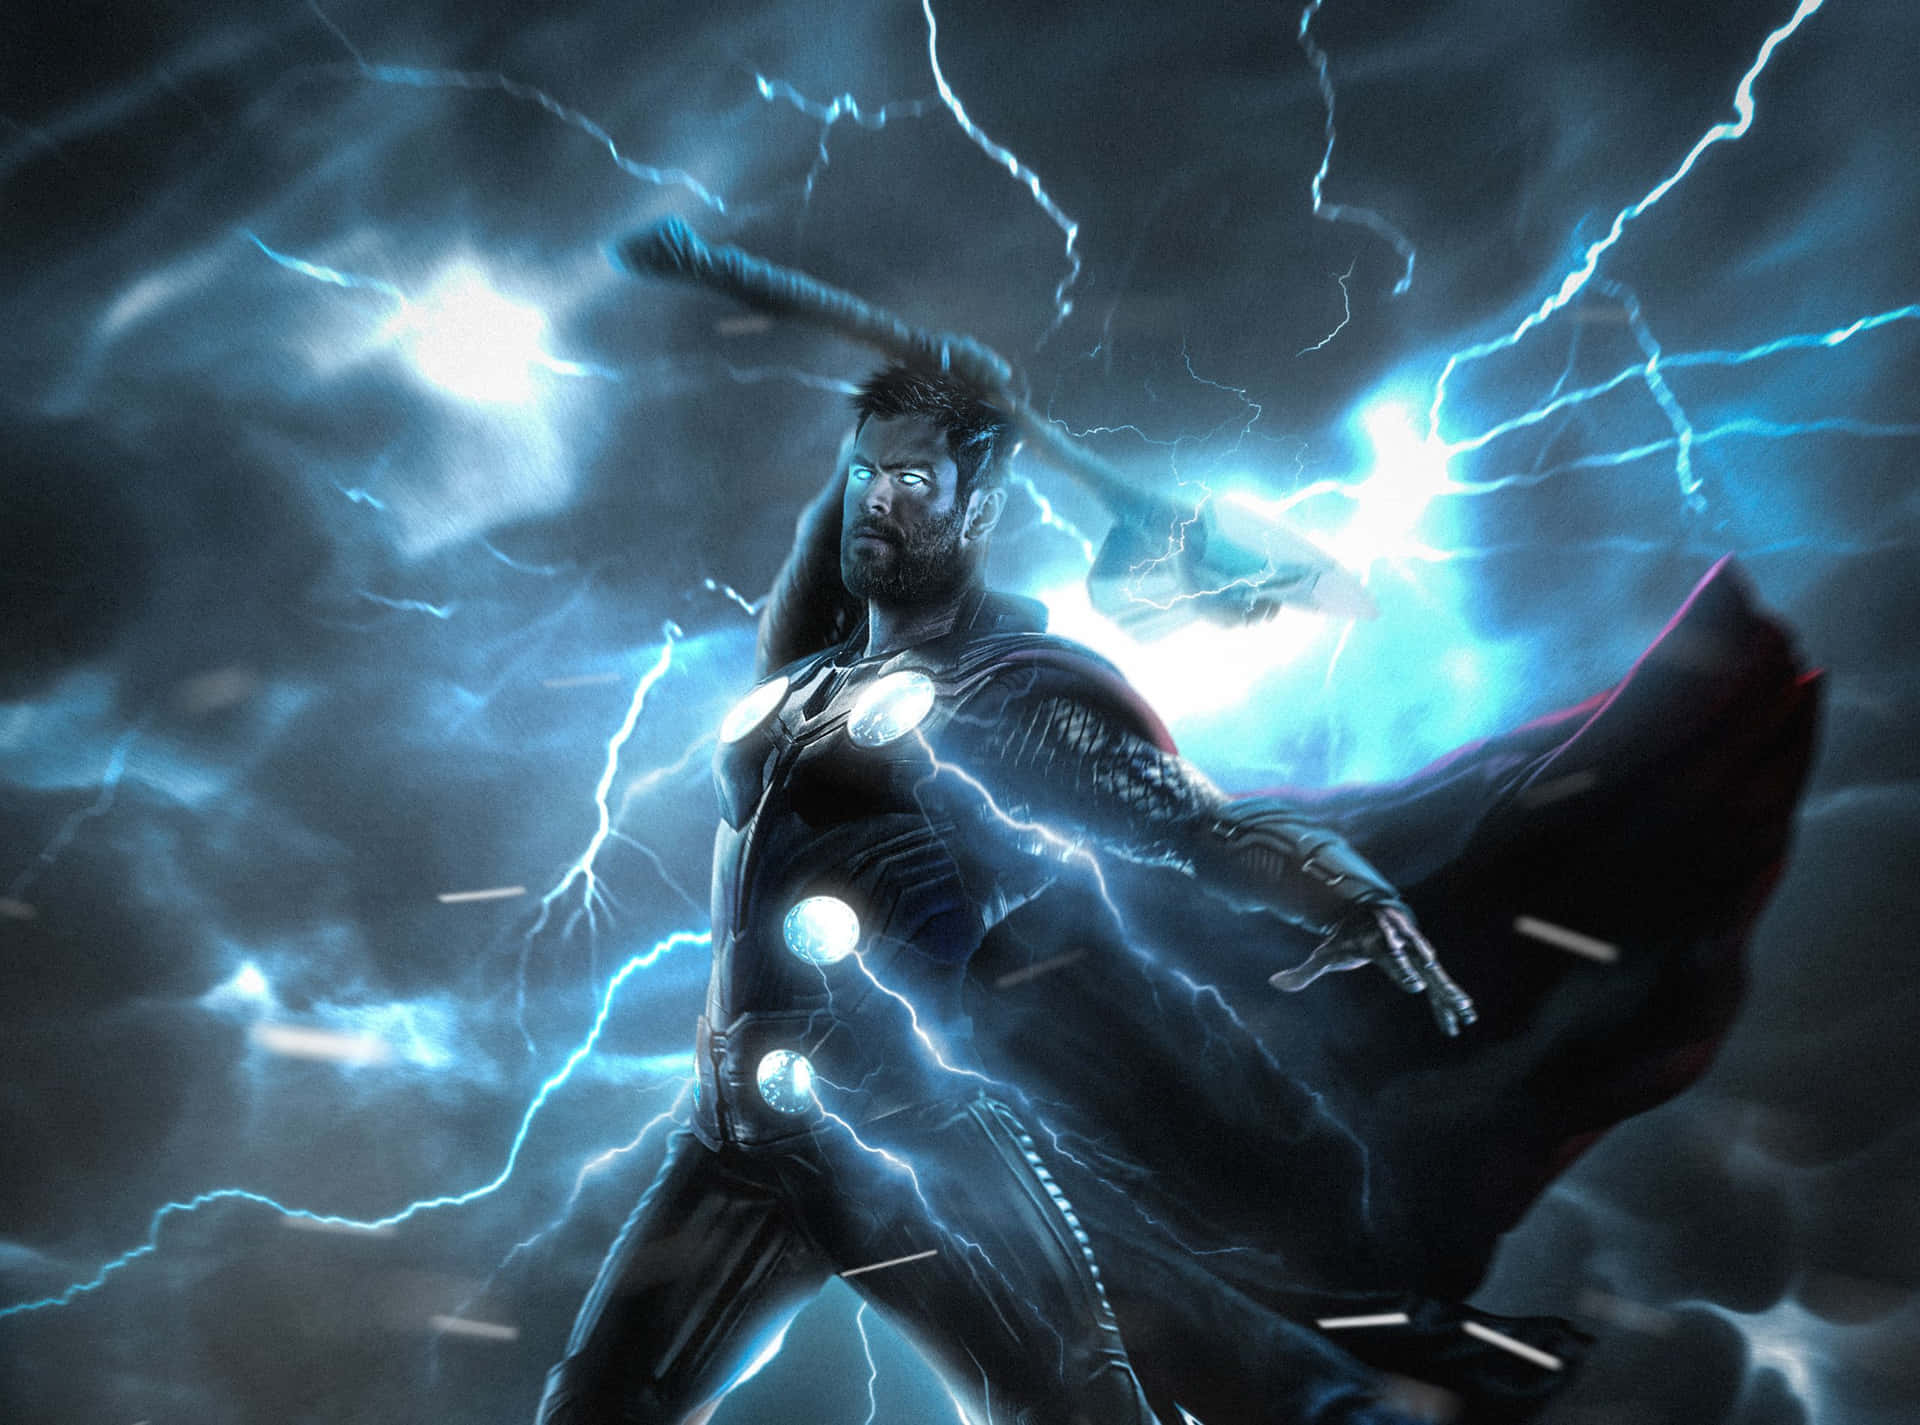 Wielding the power of Thor’s Mjölnir, the God of Thunder commands the storm Wallpaper